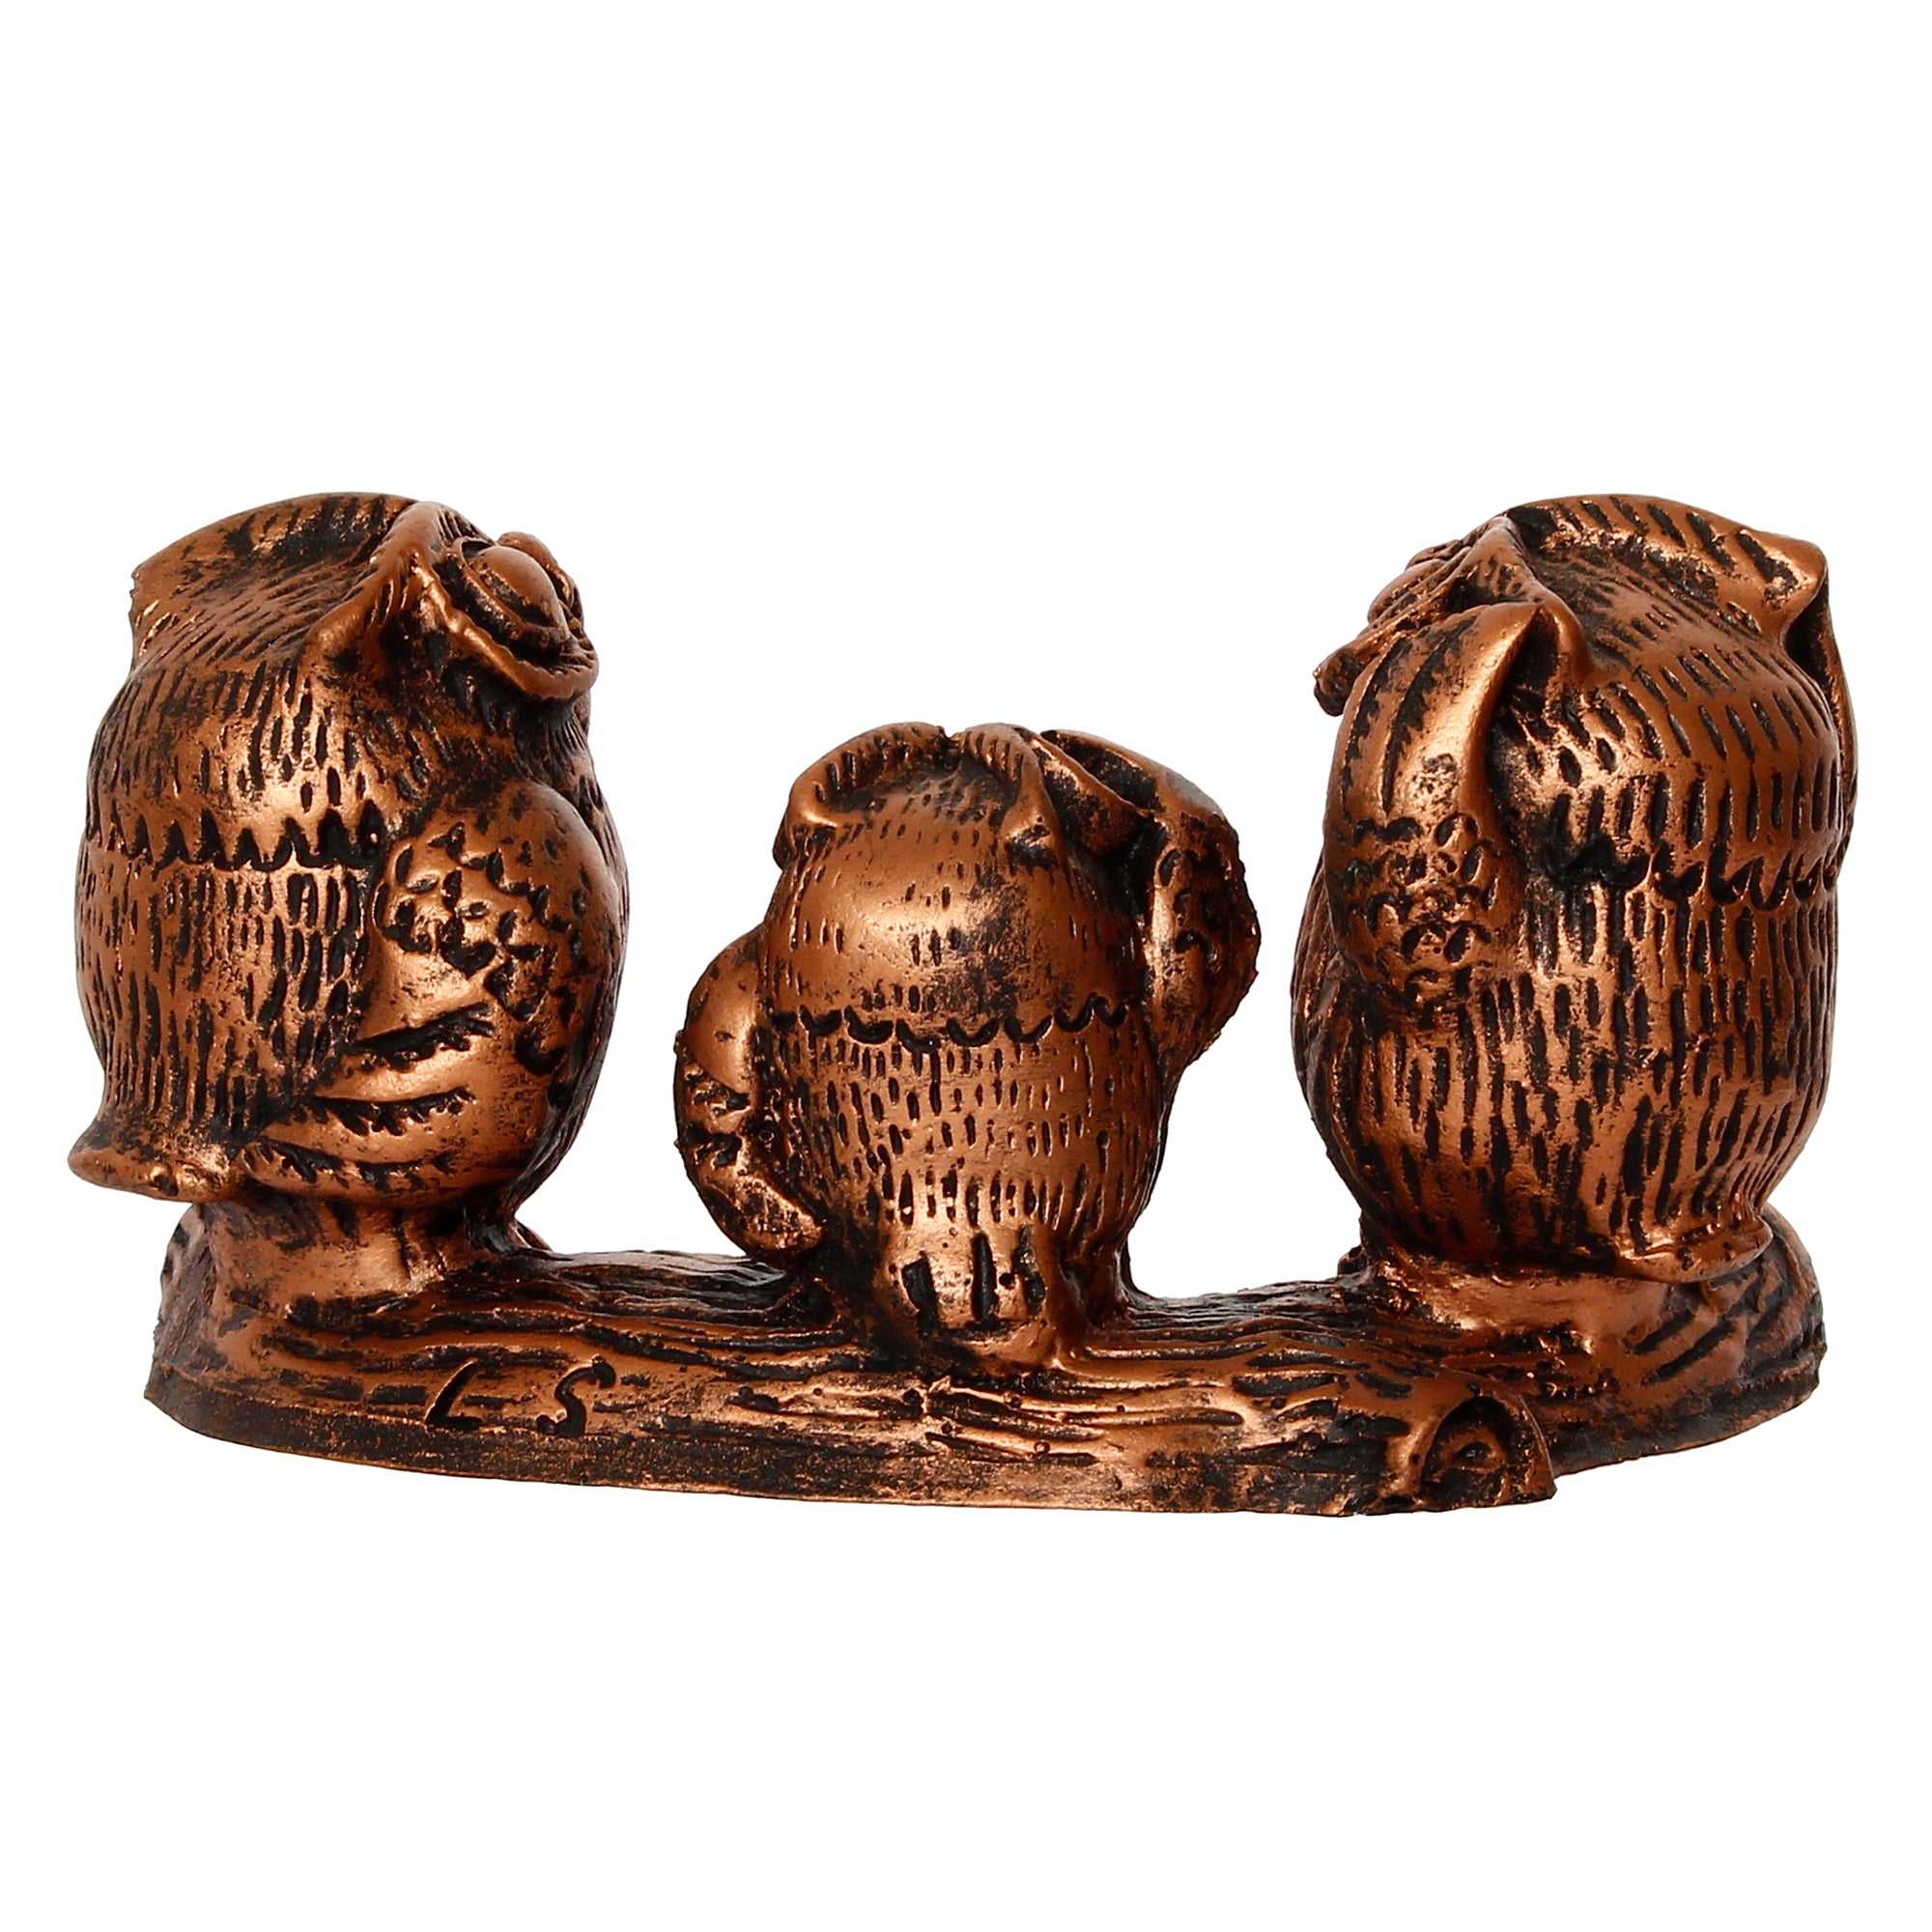 3 Owl Sitting on Branch Brown Handcrafted Polyresin Decorative Showpiece 6